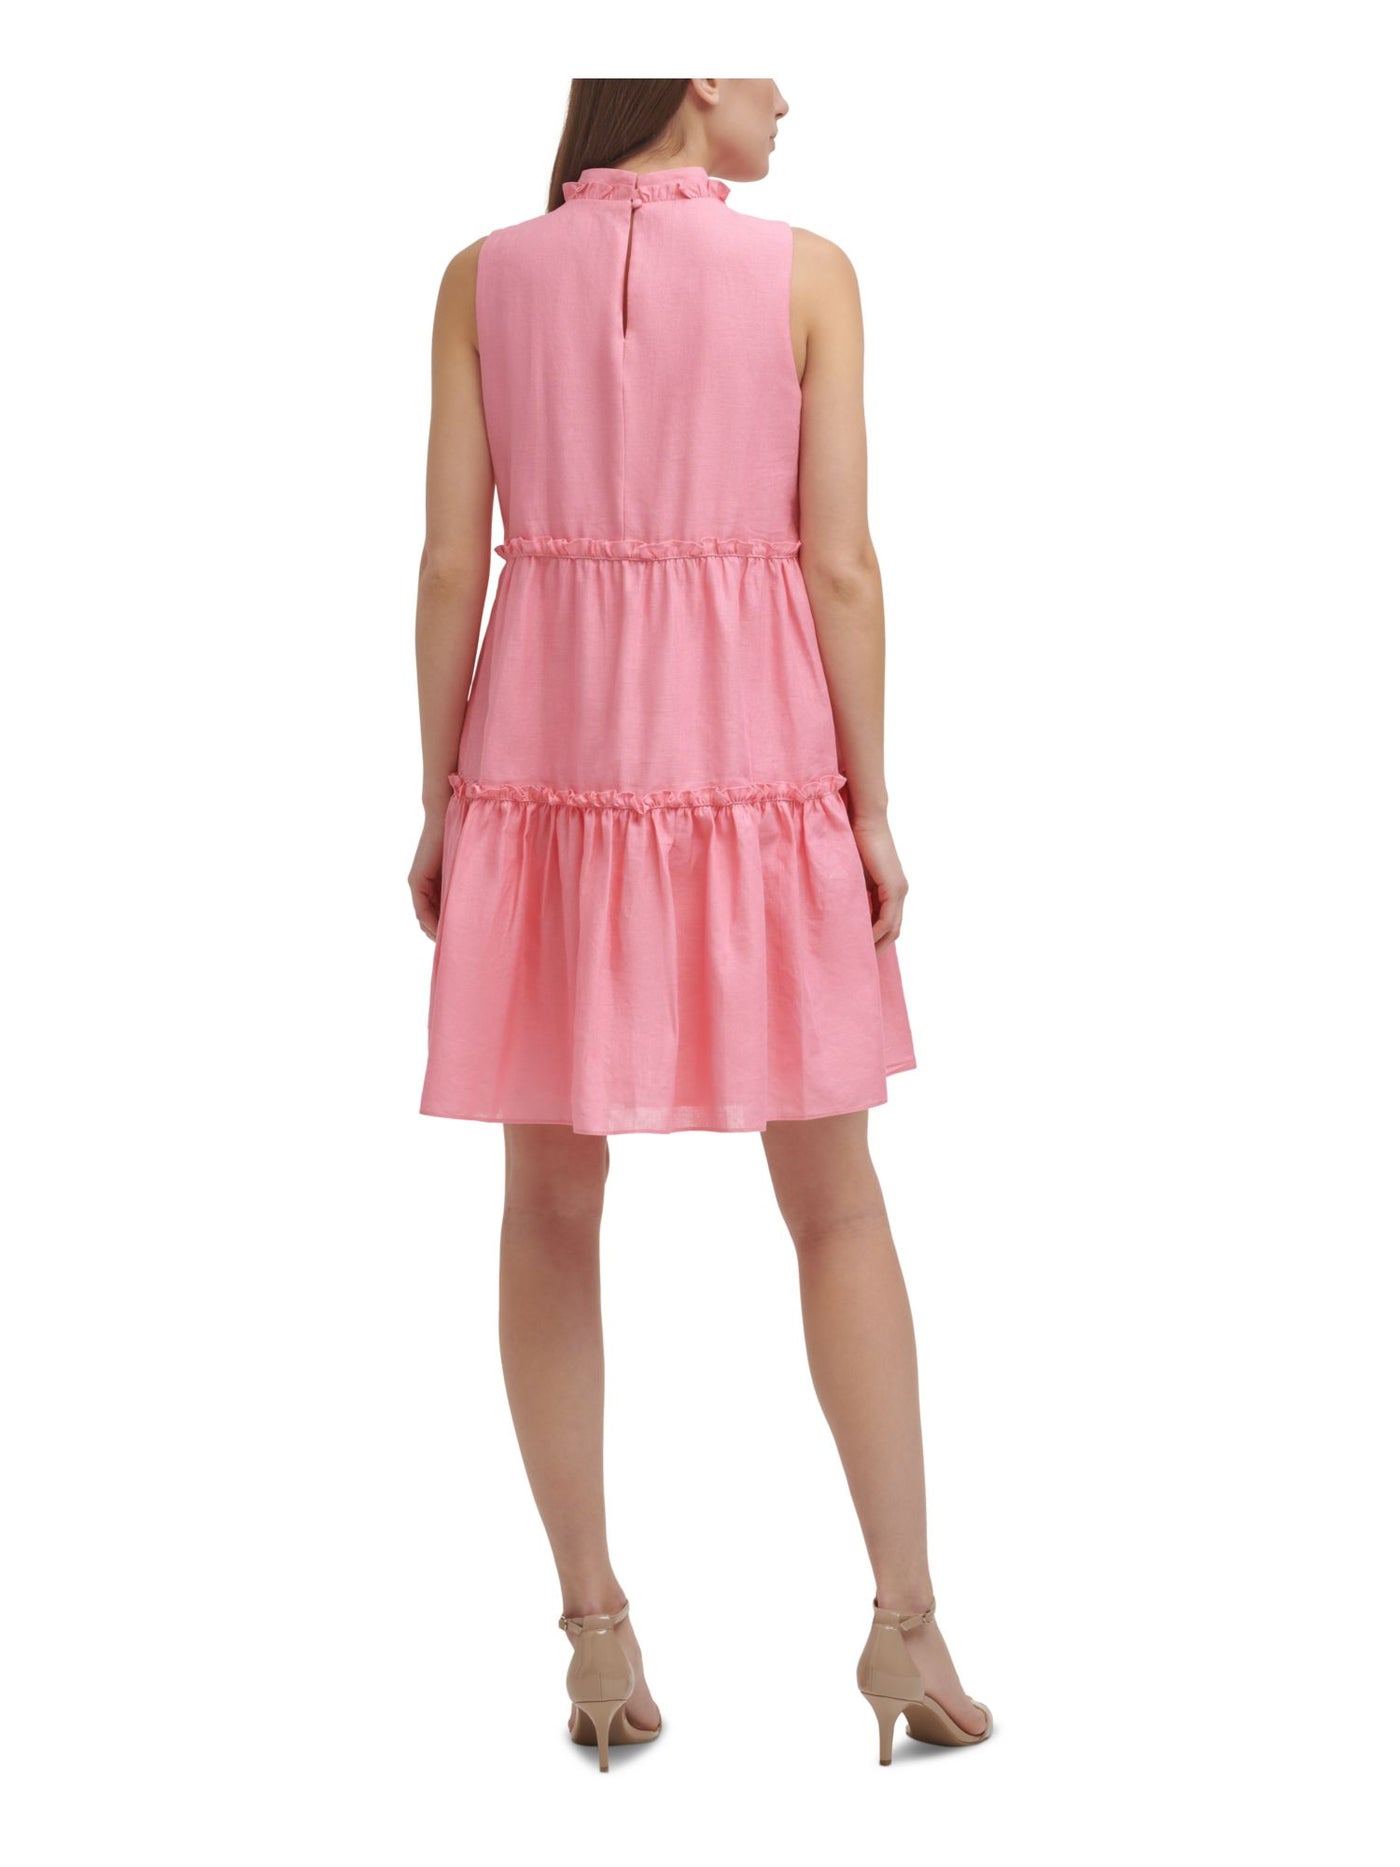 VINCE CAMUTO Womens Pink Sleeveless Mock Neck Above The Knee Cocktail Ruffled Dress 12